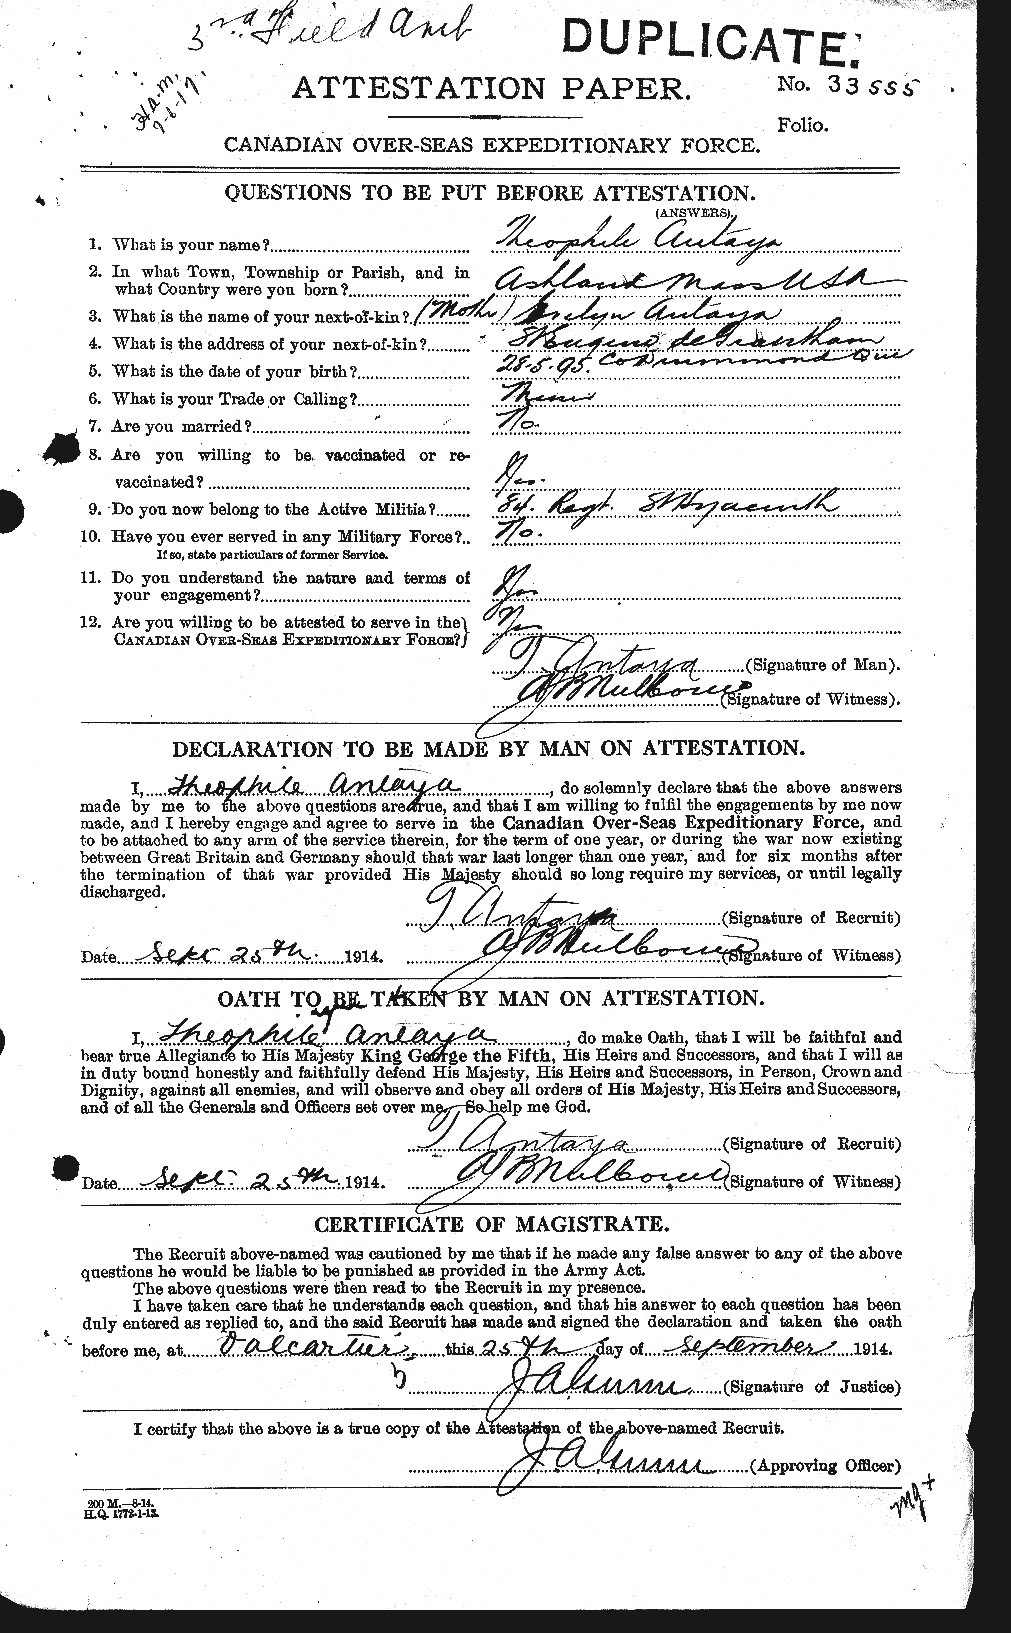 Personnel Records of the First World War - CEF 212257a